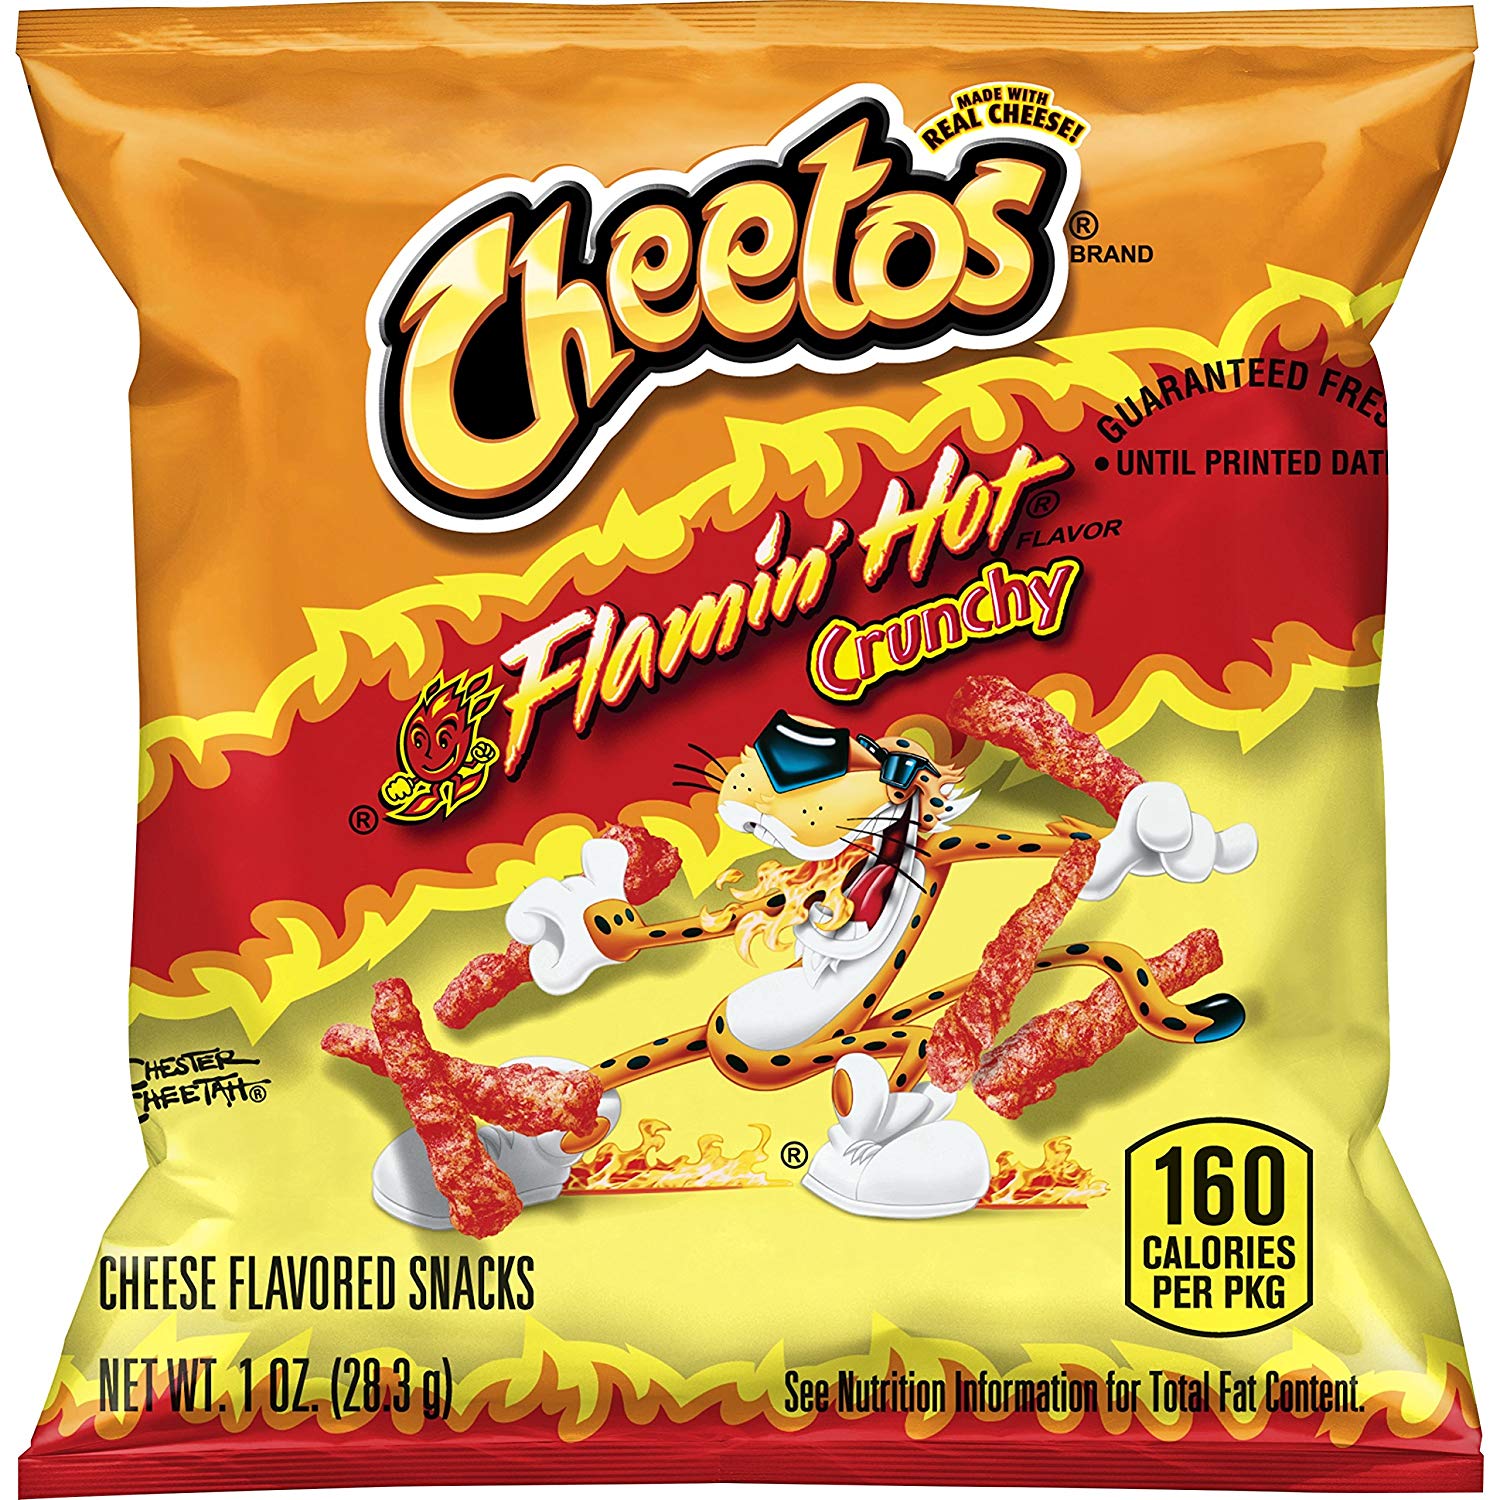 Cheetos Crunchy Flamin' Hot Cheese Flavored Snacks, 1 oz Bags, 40 Count - image 1 of 4